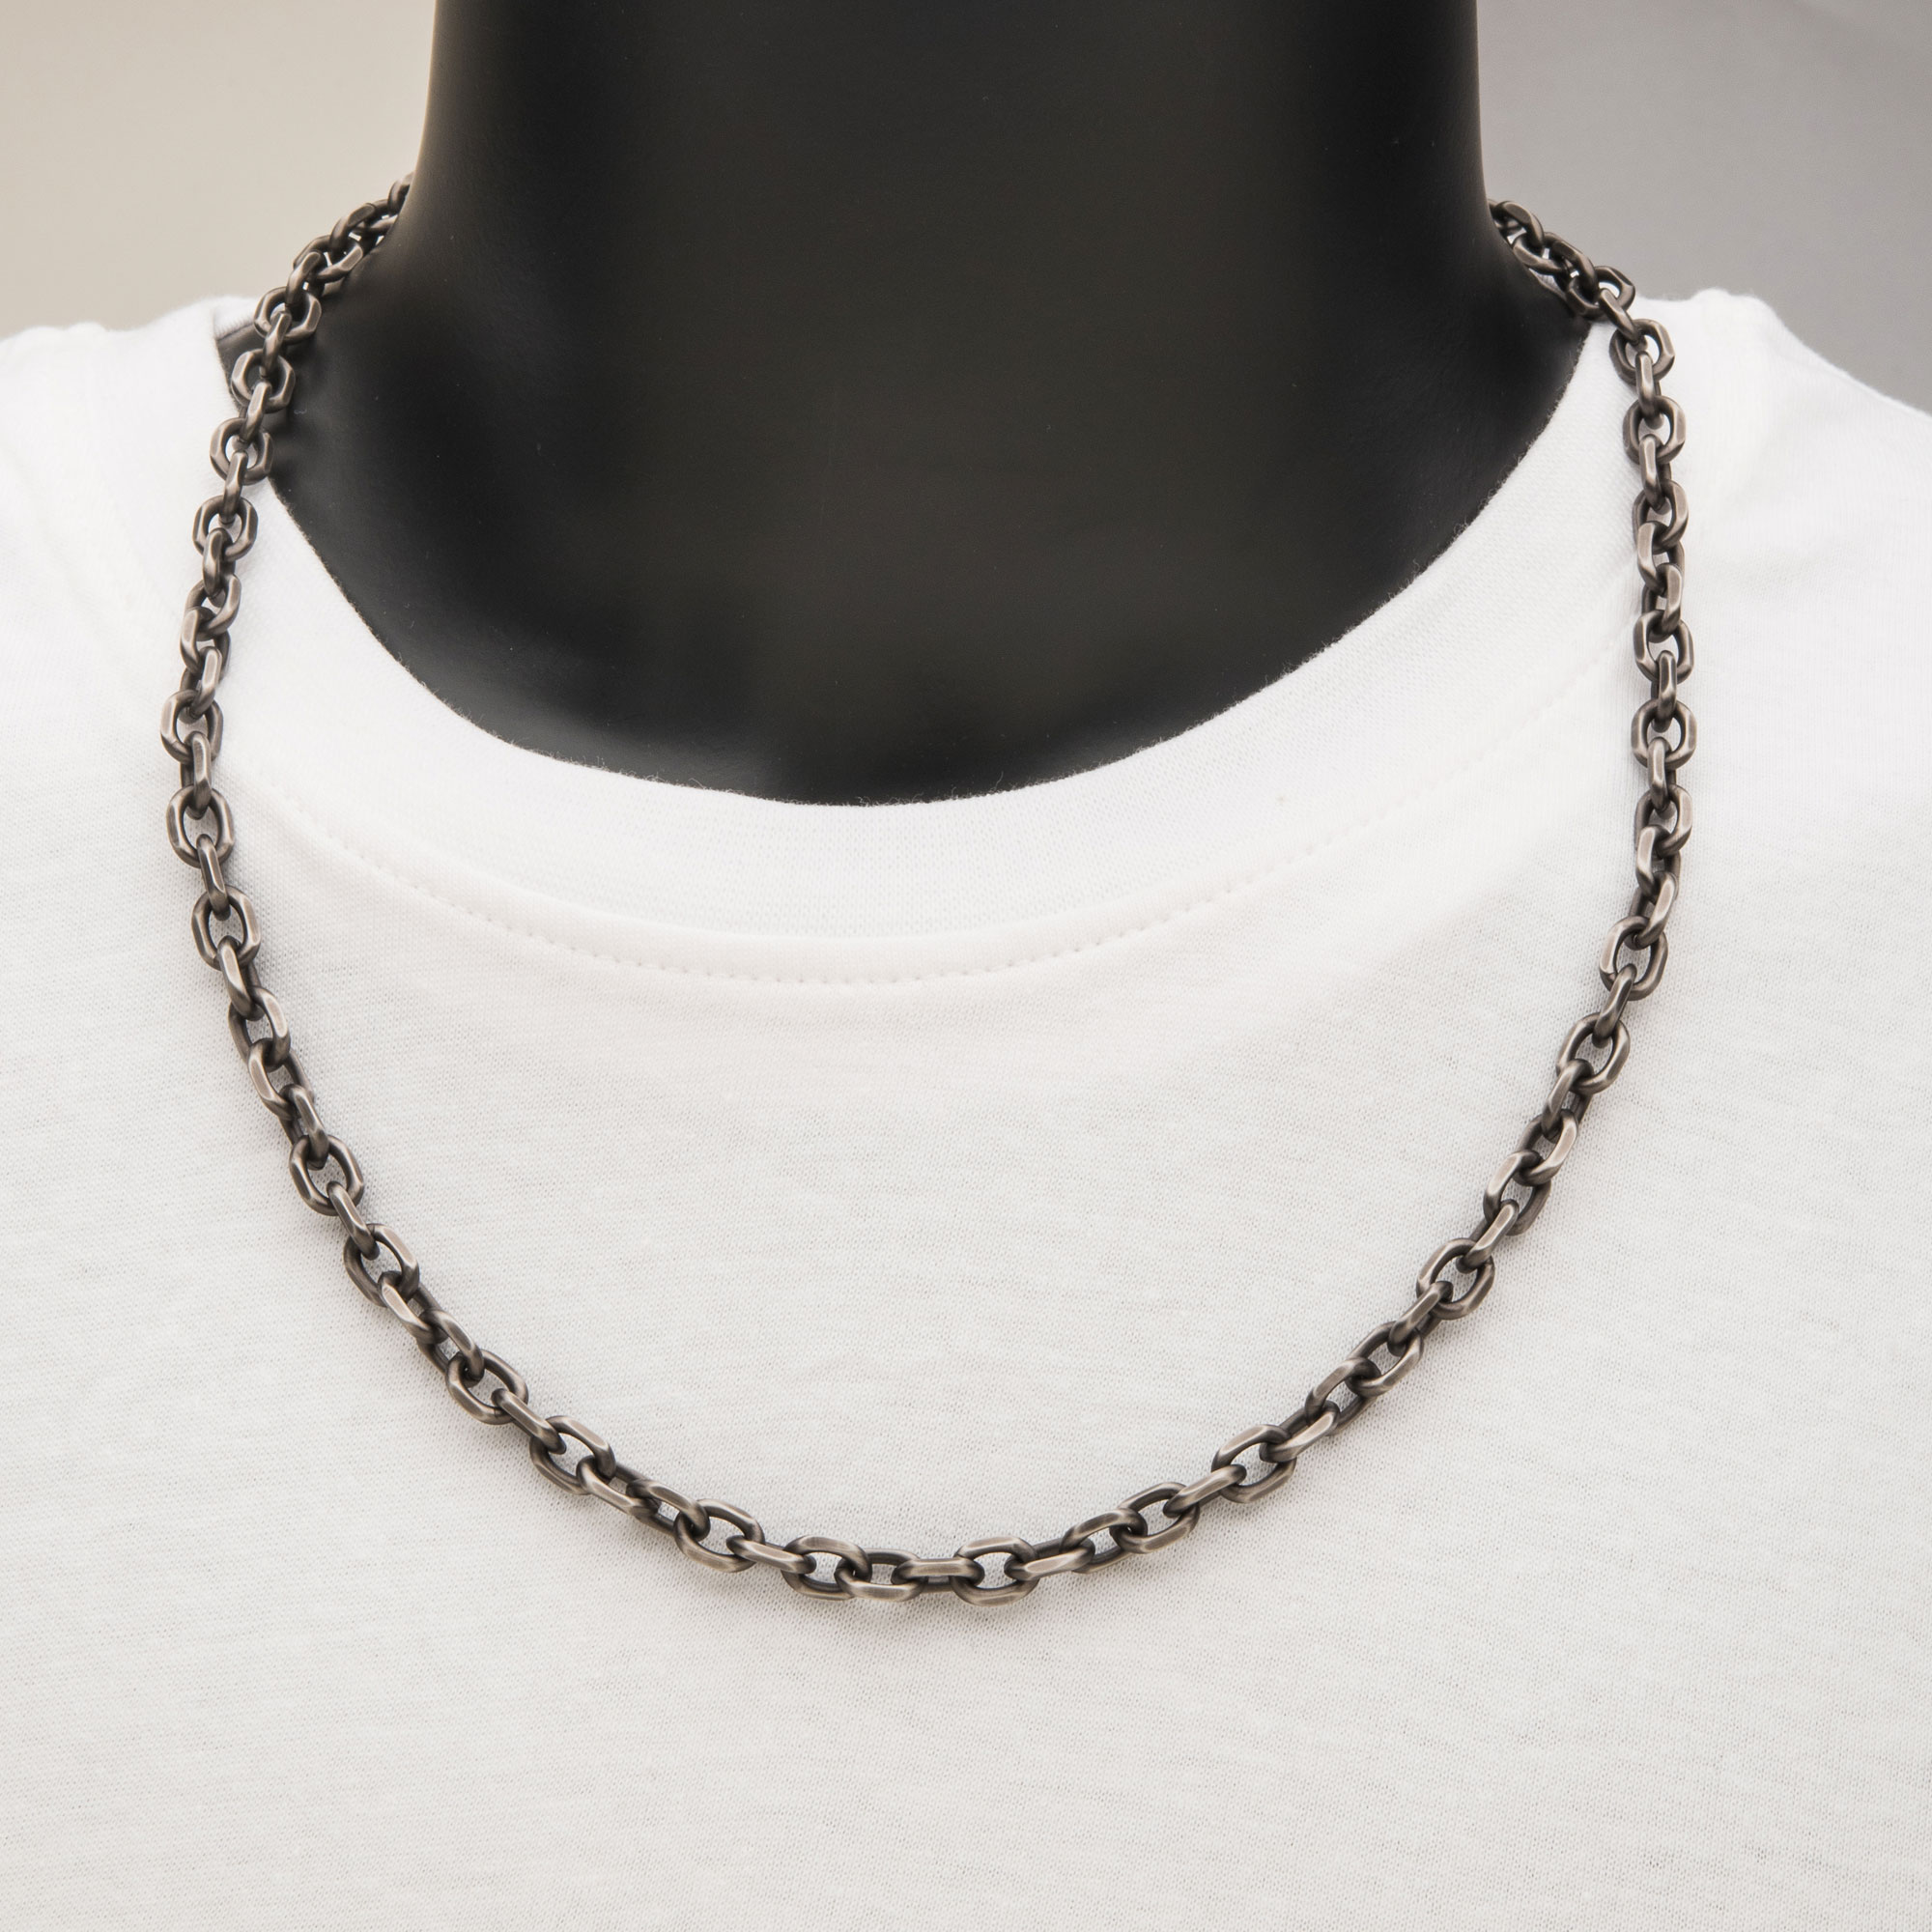 7mm Oxidized Steel Knife Edge Link Chain Image 2 Enchanted Jewelry Plainfield, CT